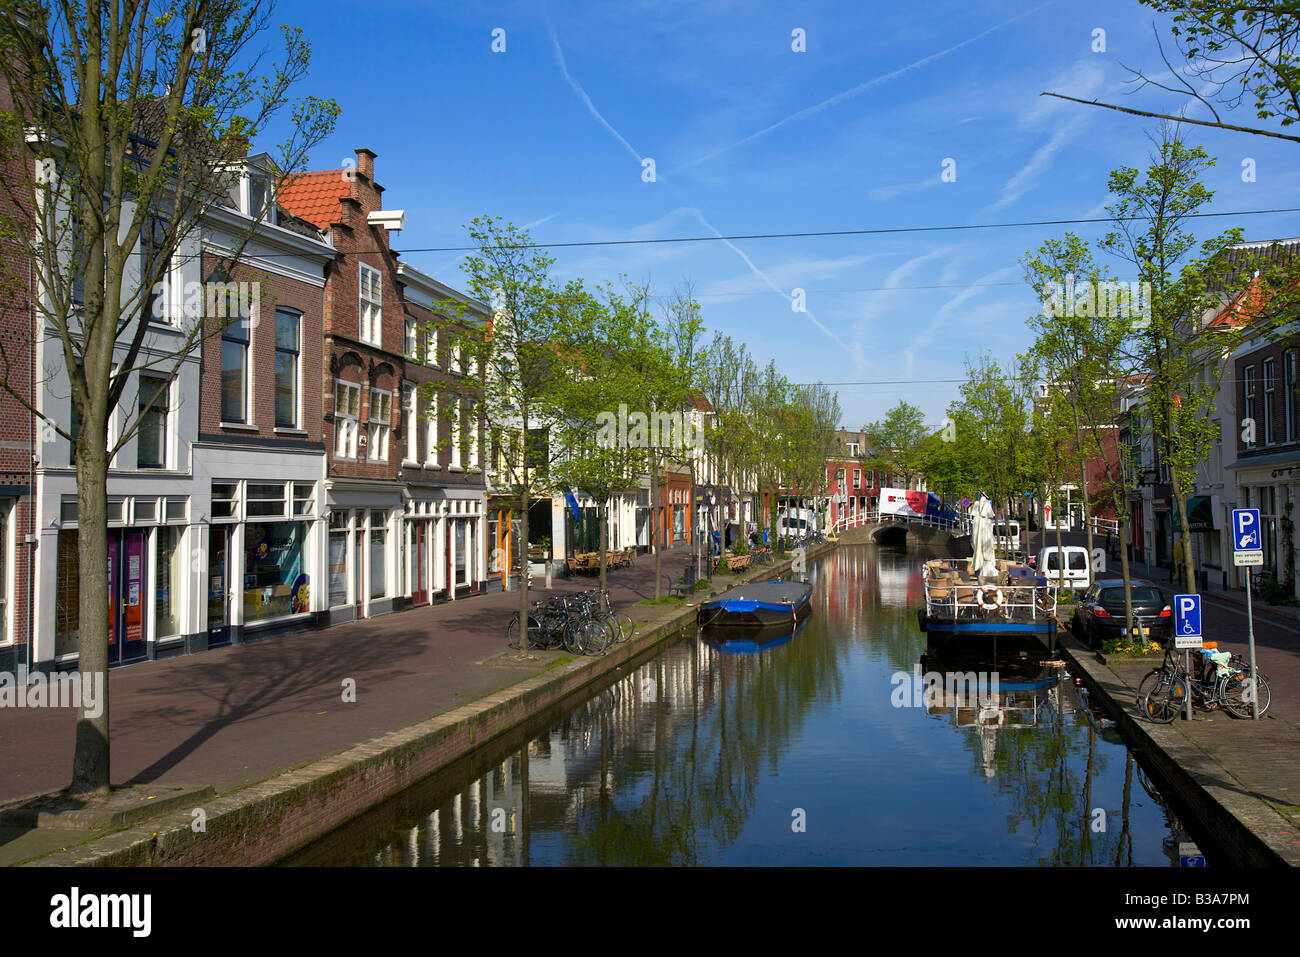 Typical view on small canal houses, Delft, Netherlands Stock Photo